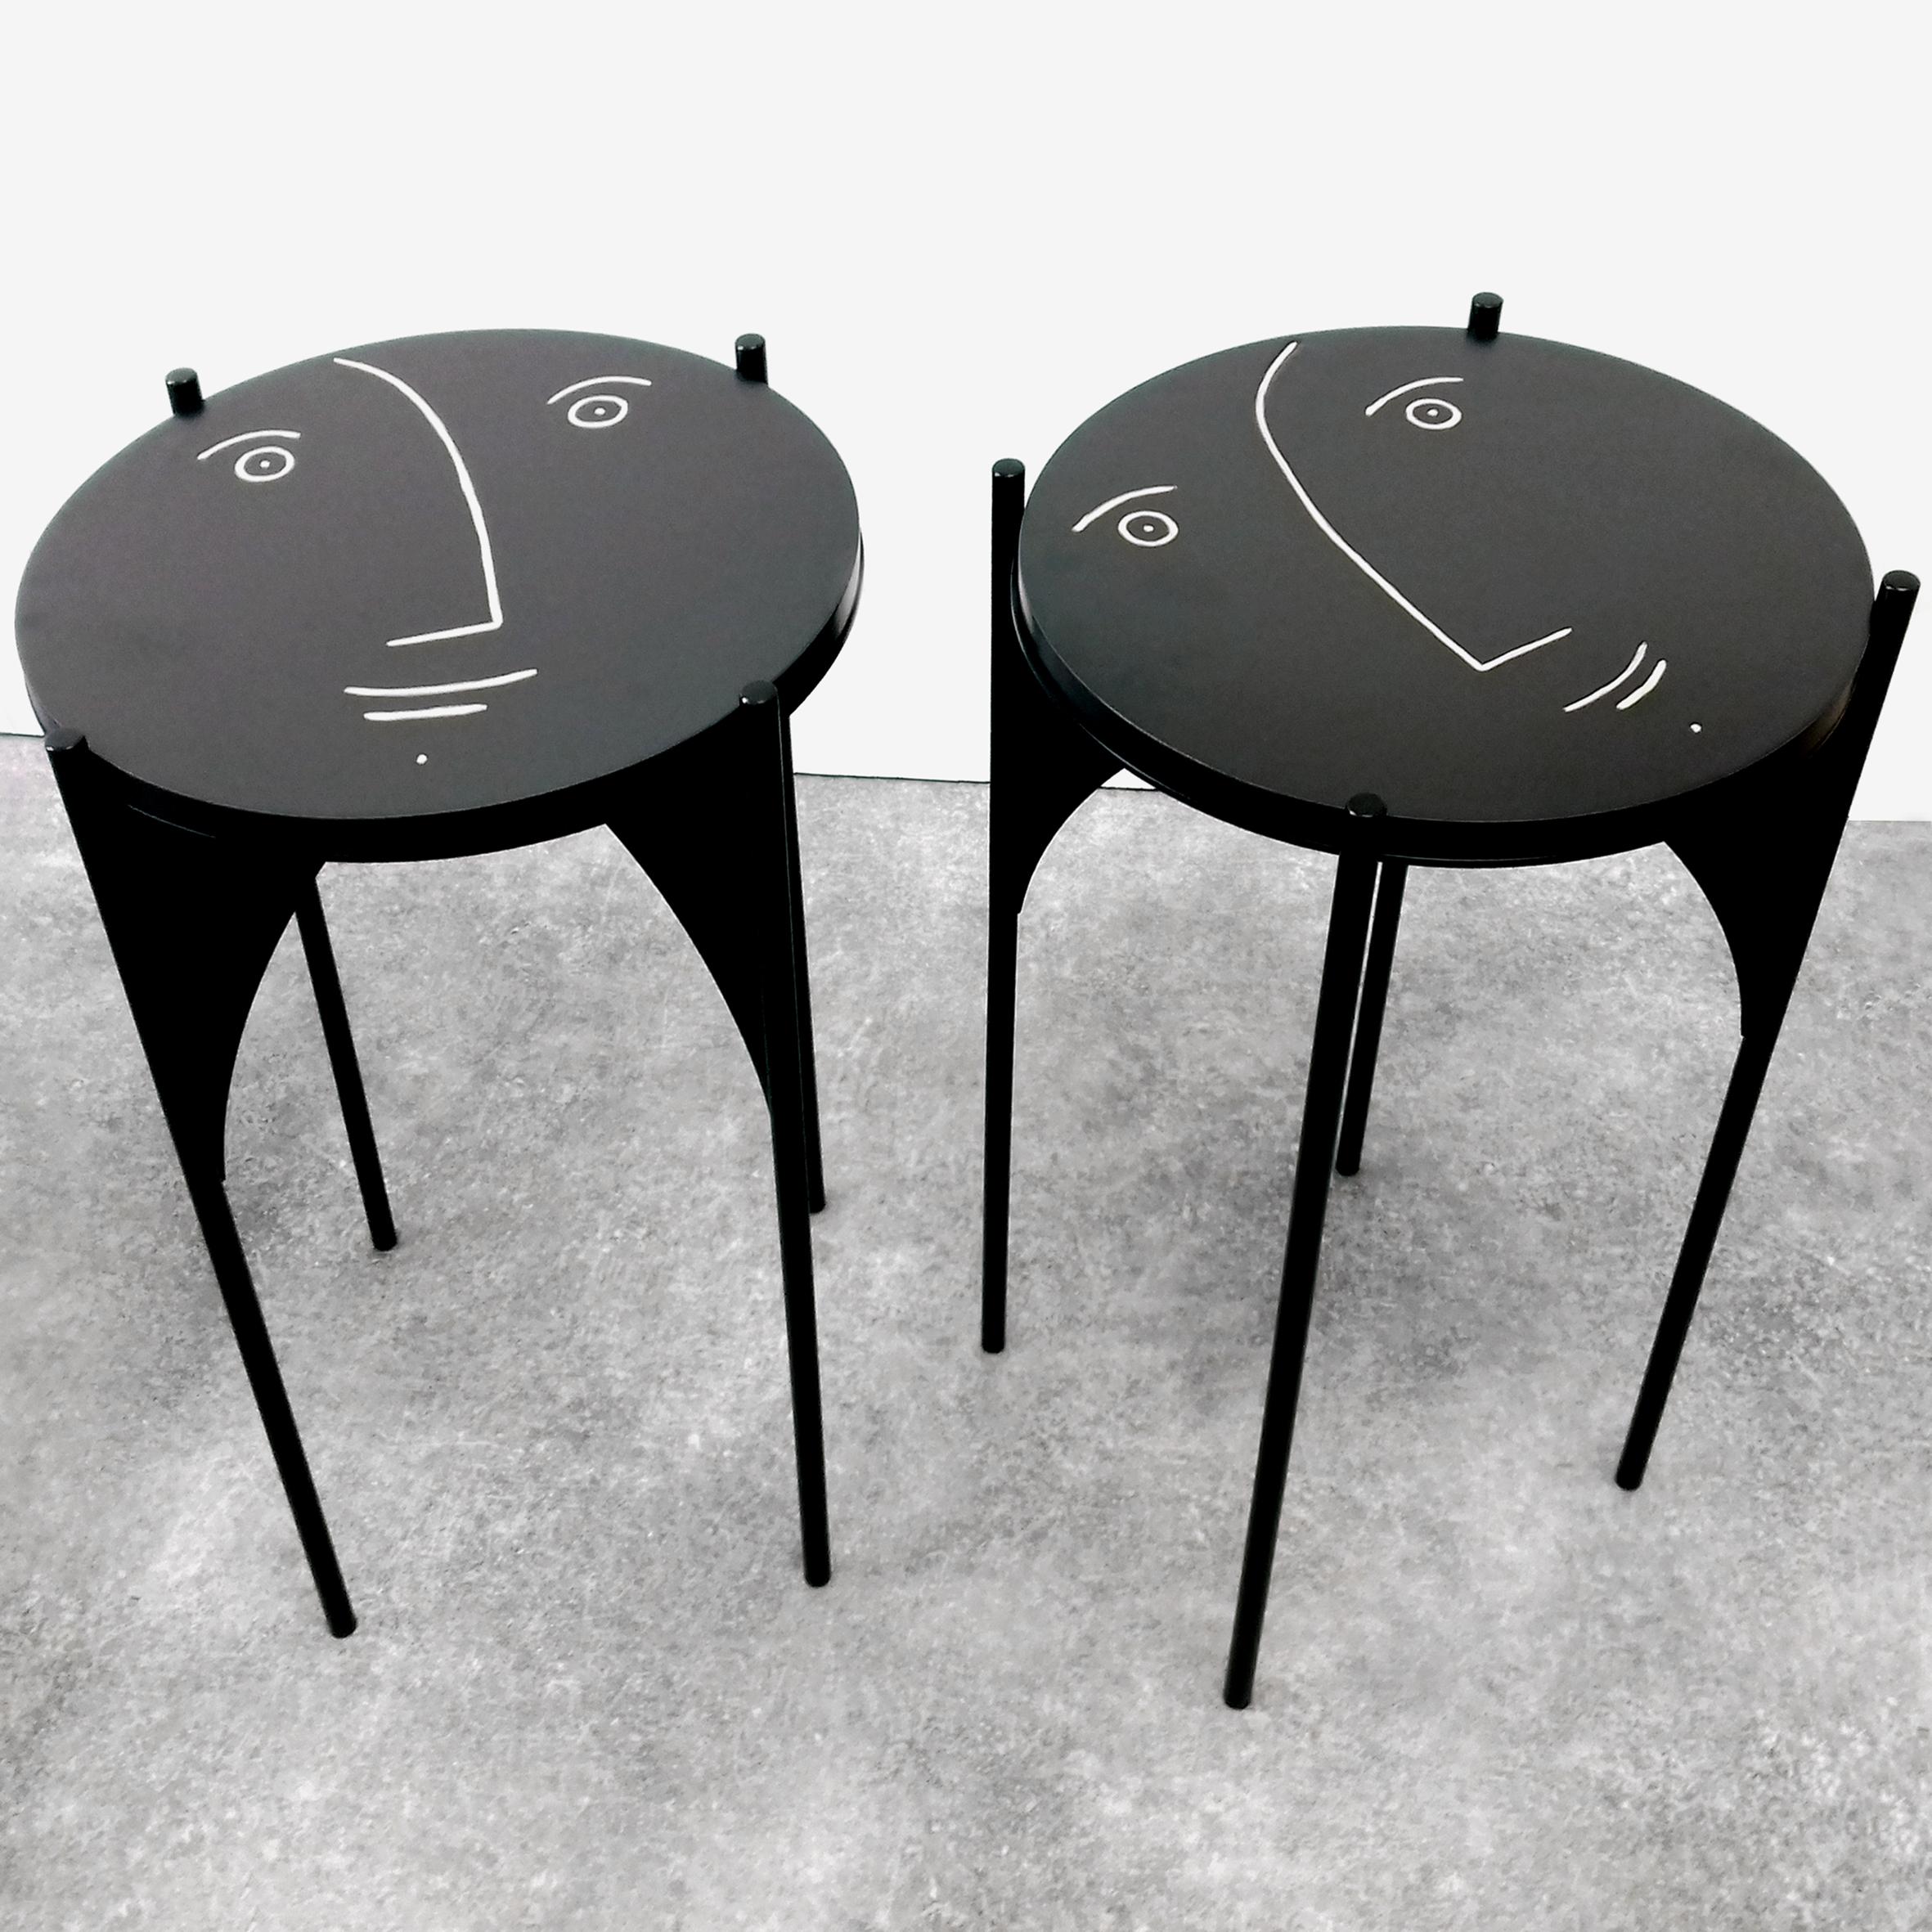 One of a kind Pair of gueridons / side tables with removable black enamel faces ceramic tops by Dalo (on black metal feet by French designer Quentin Aimable.)
